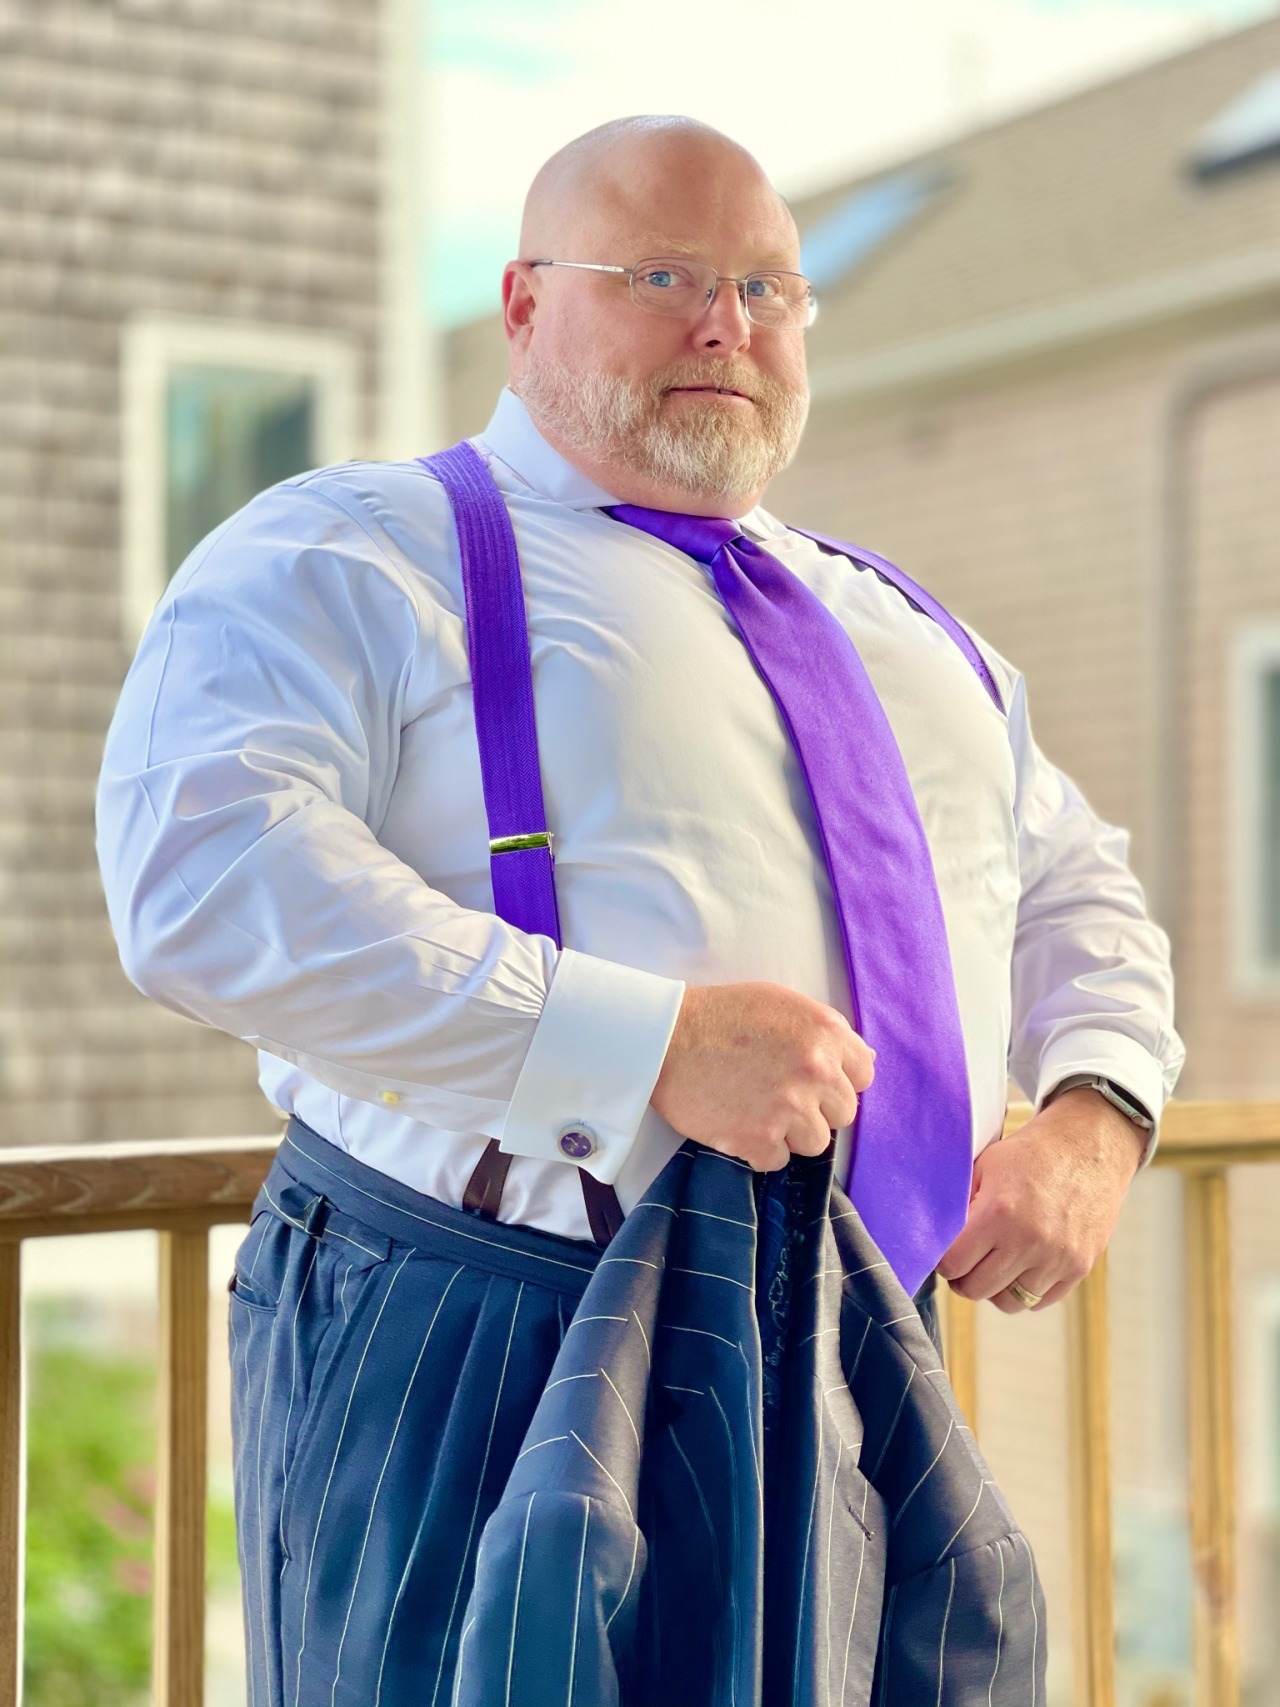 The Papa Bear of Men's Fashion — Suspenders (or Braces) and the Big Man ...